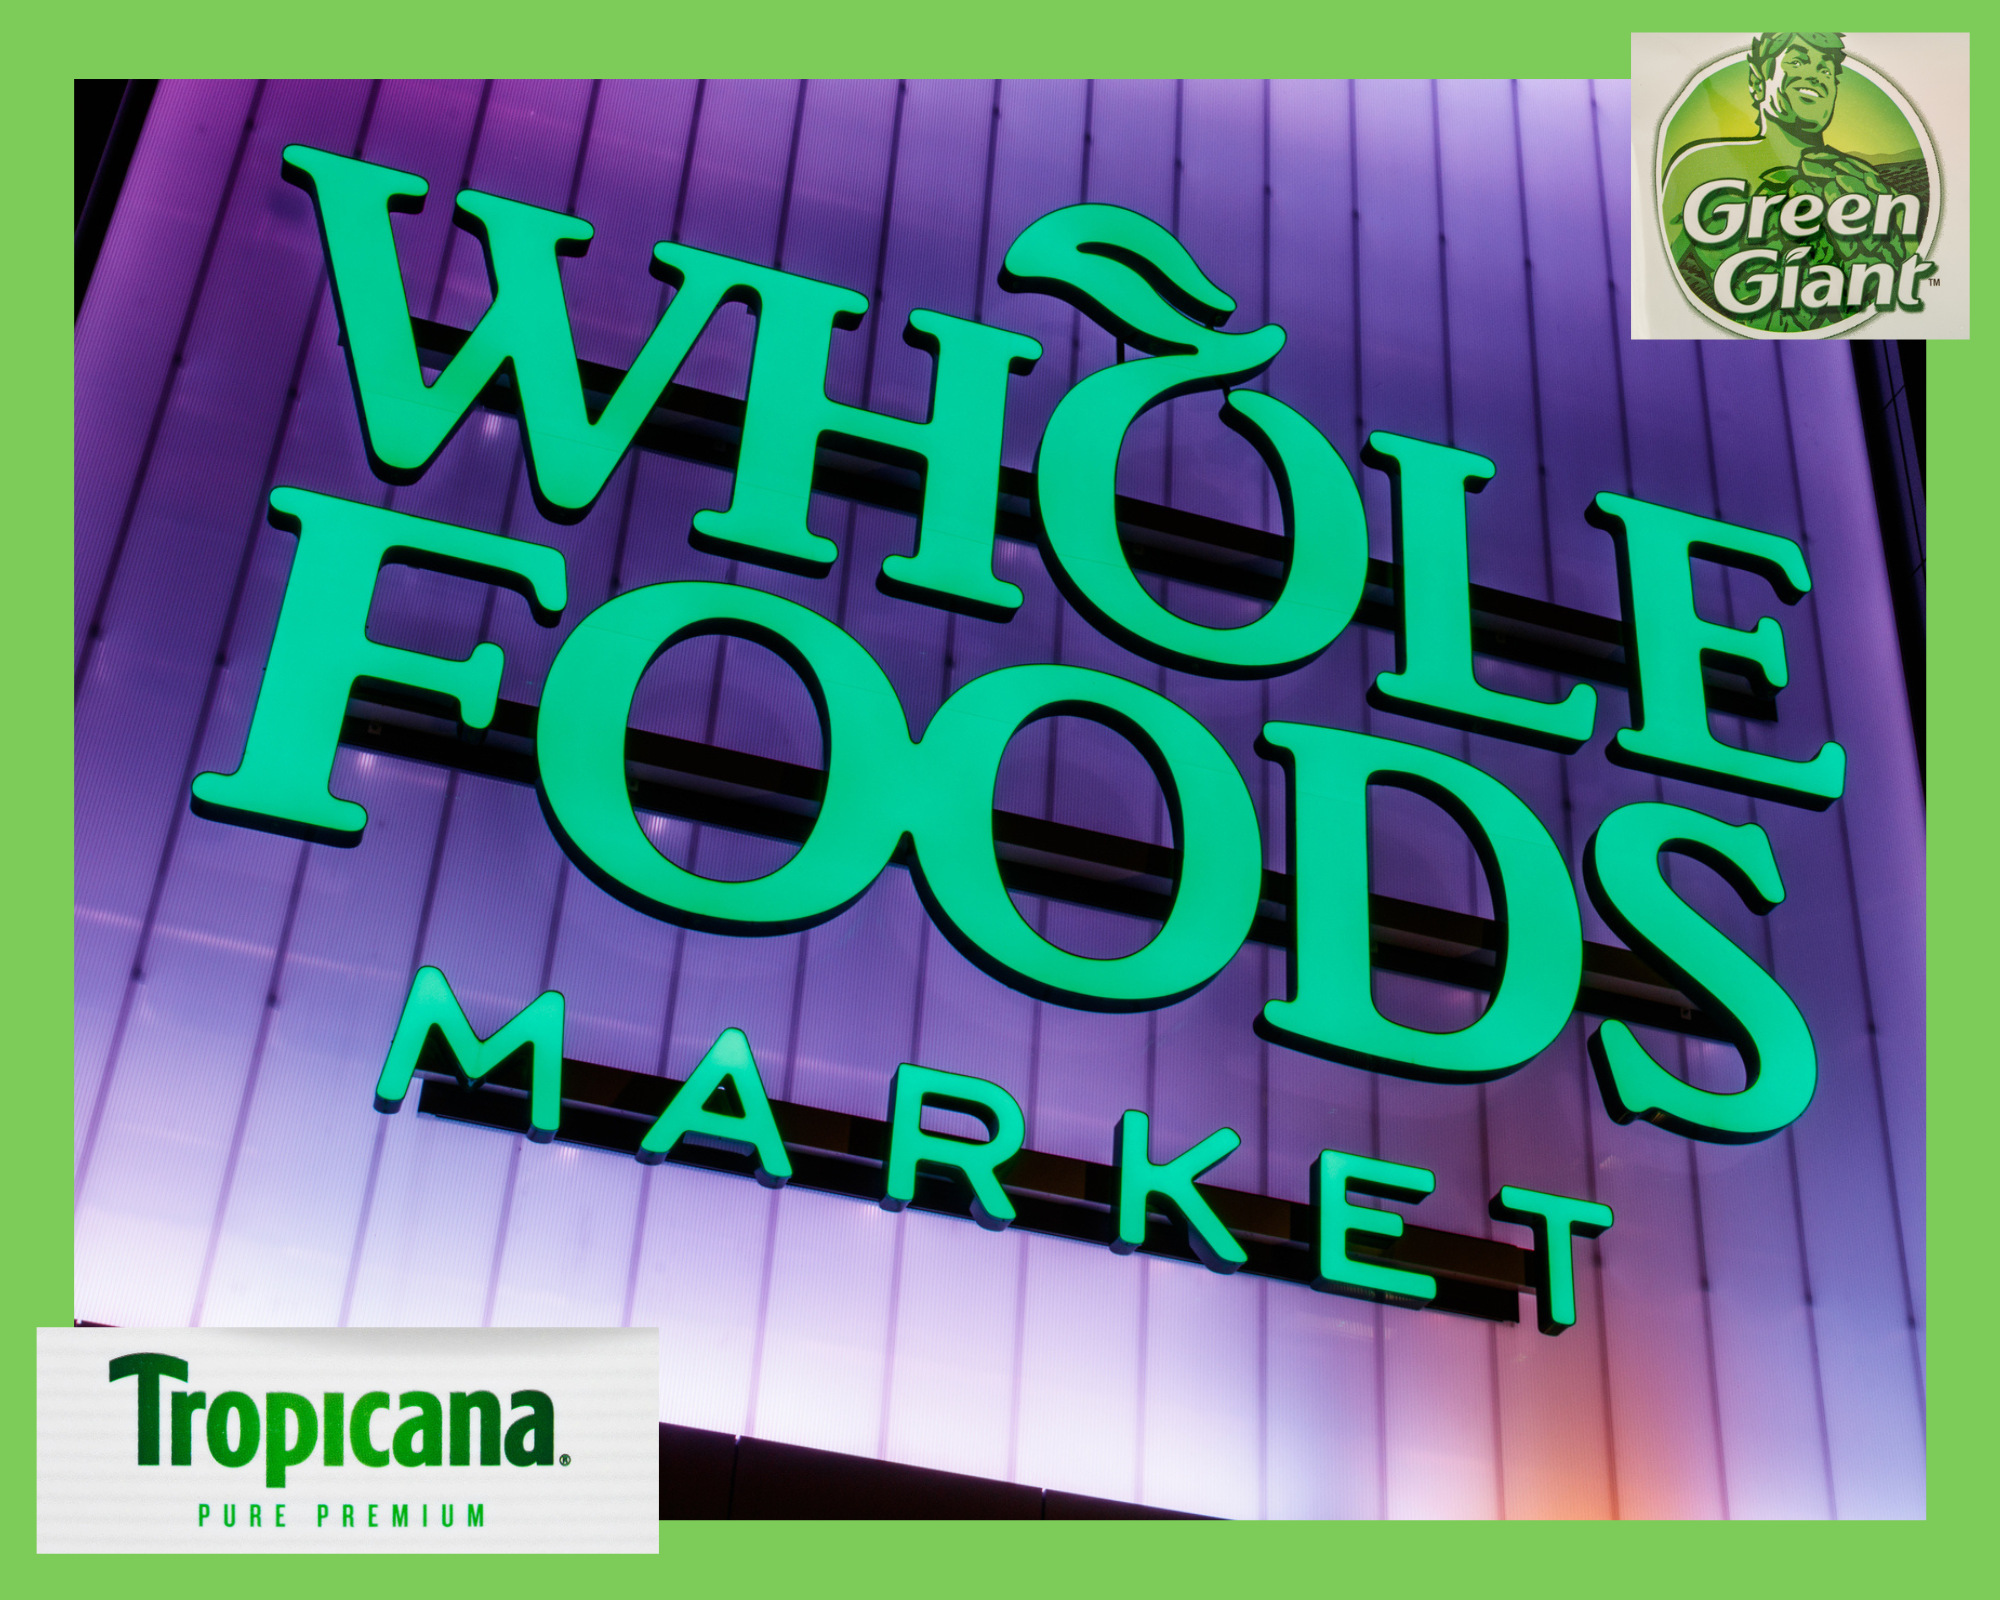 green logos of Whole foods, tropicana, and green giant